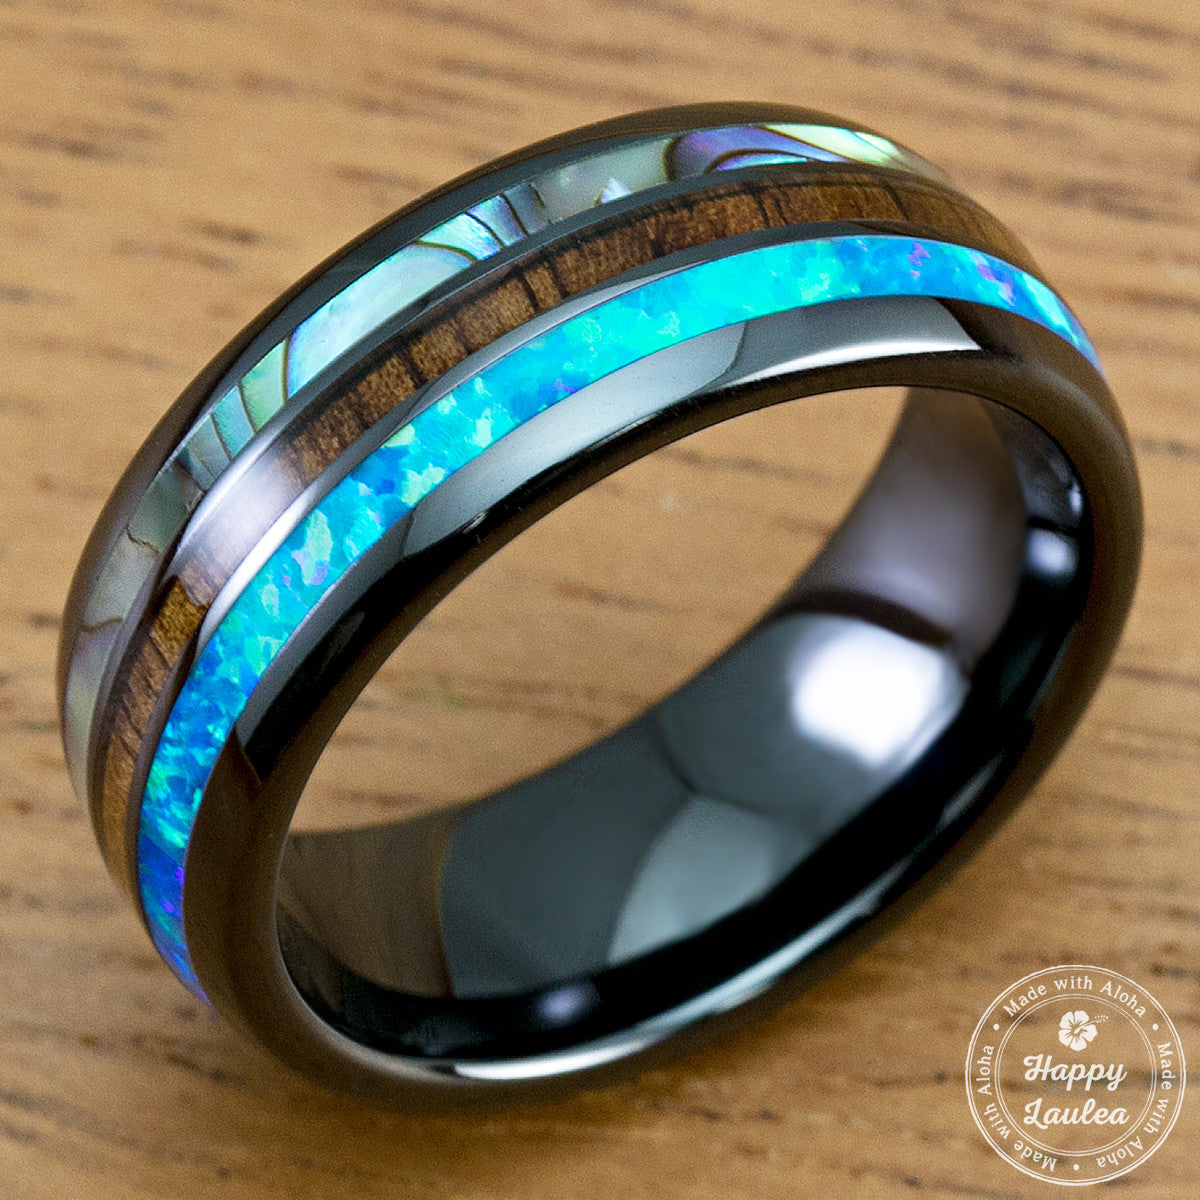 HI-TECH Black Ceramic Ring with Abalone Shell, Koa Wood & Opal Inlay - 8mm, Dome Shape, Comfort Fitment